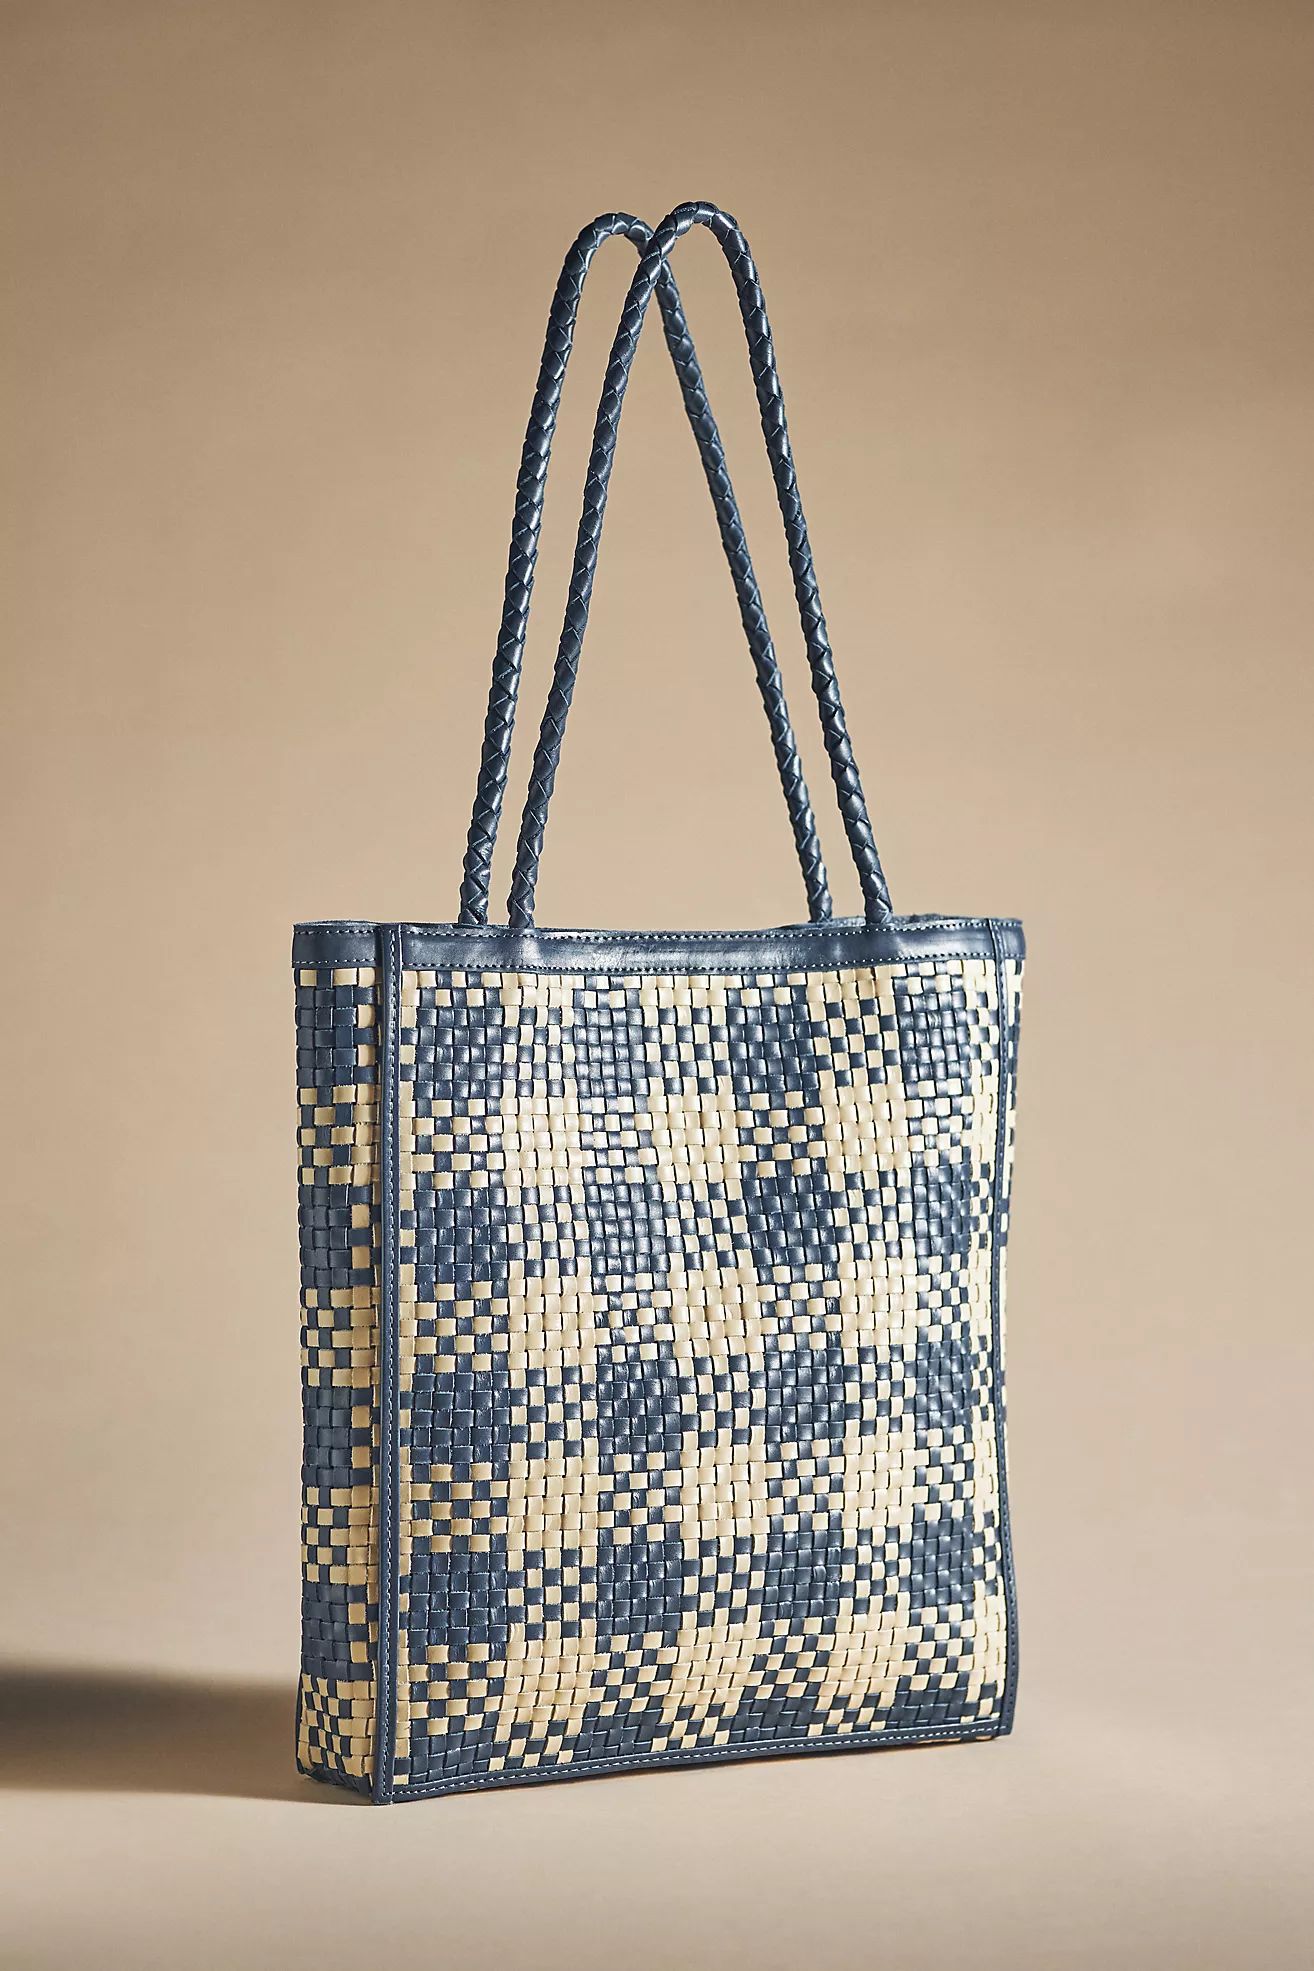 Bembien Le Tote Woven Check Bag | Anthropologie (US)